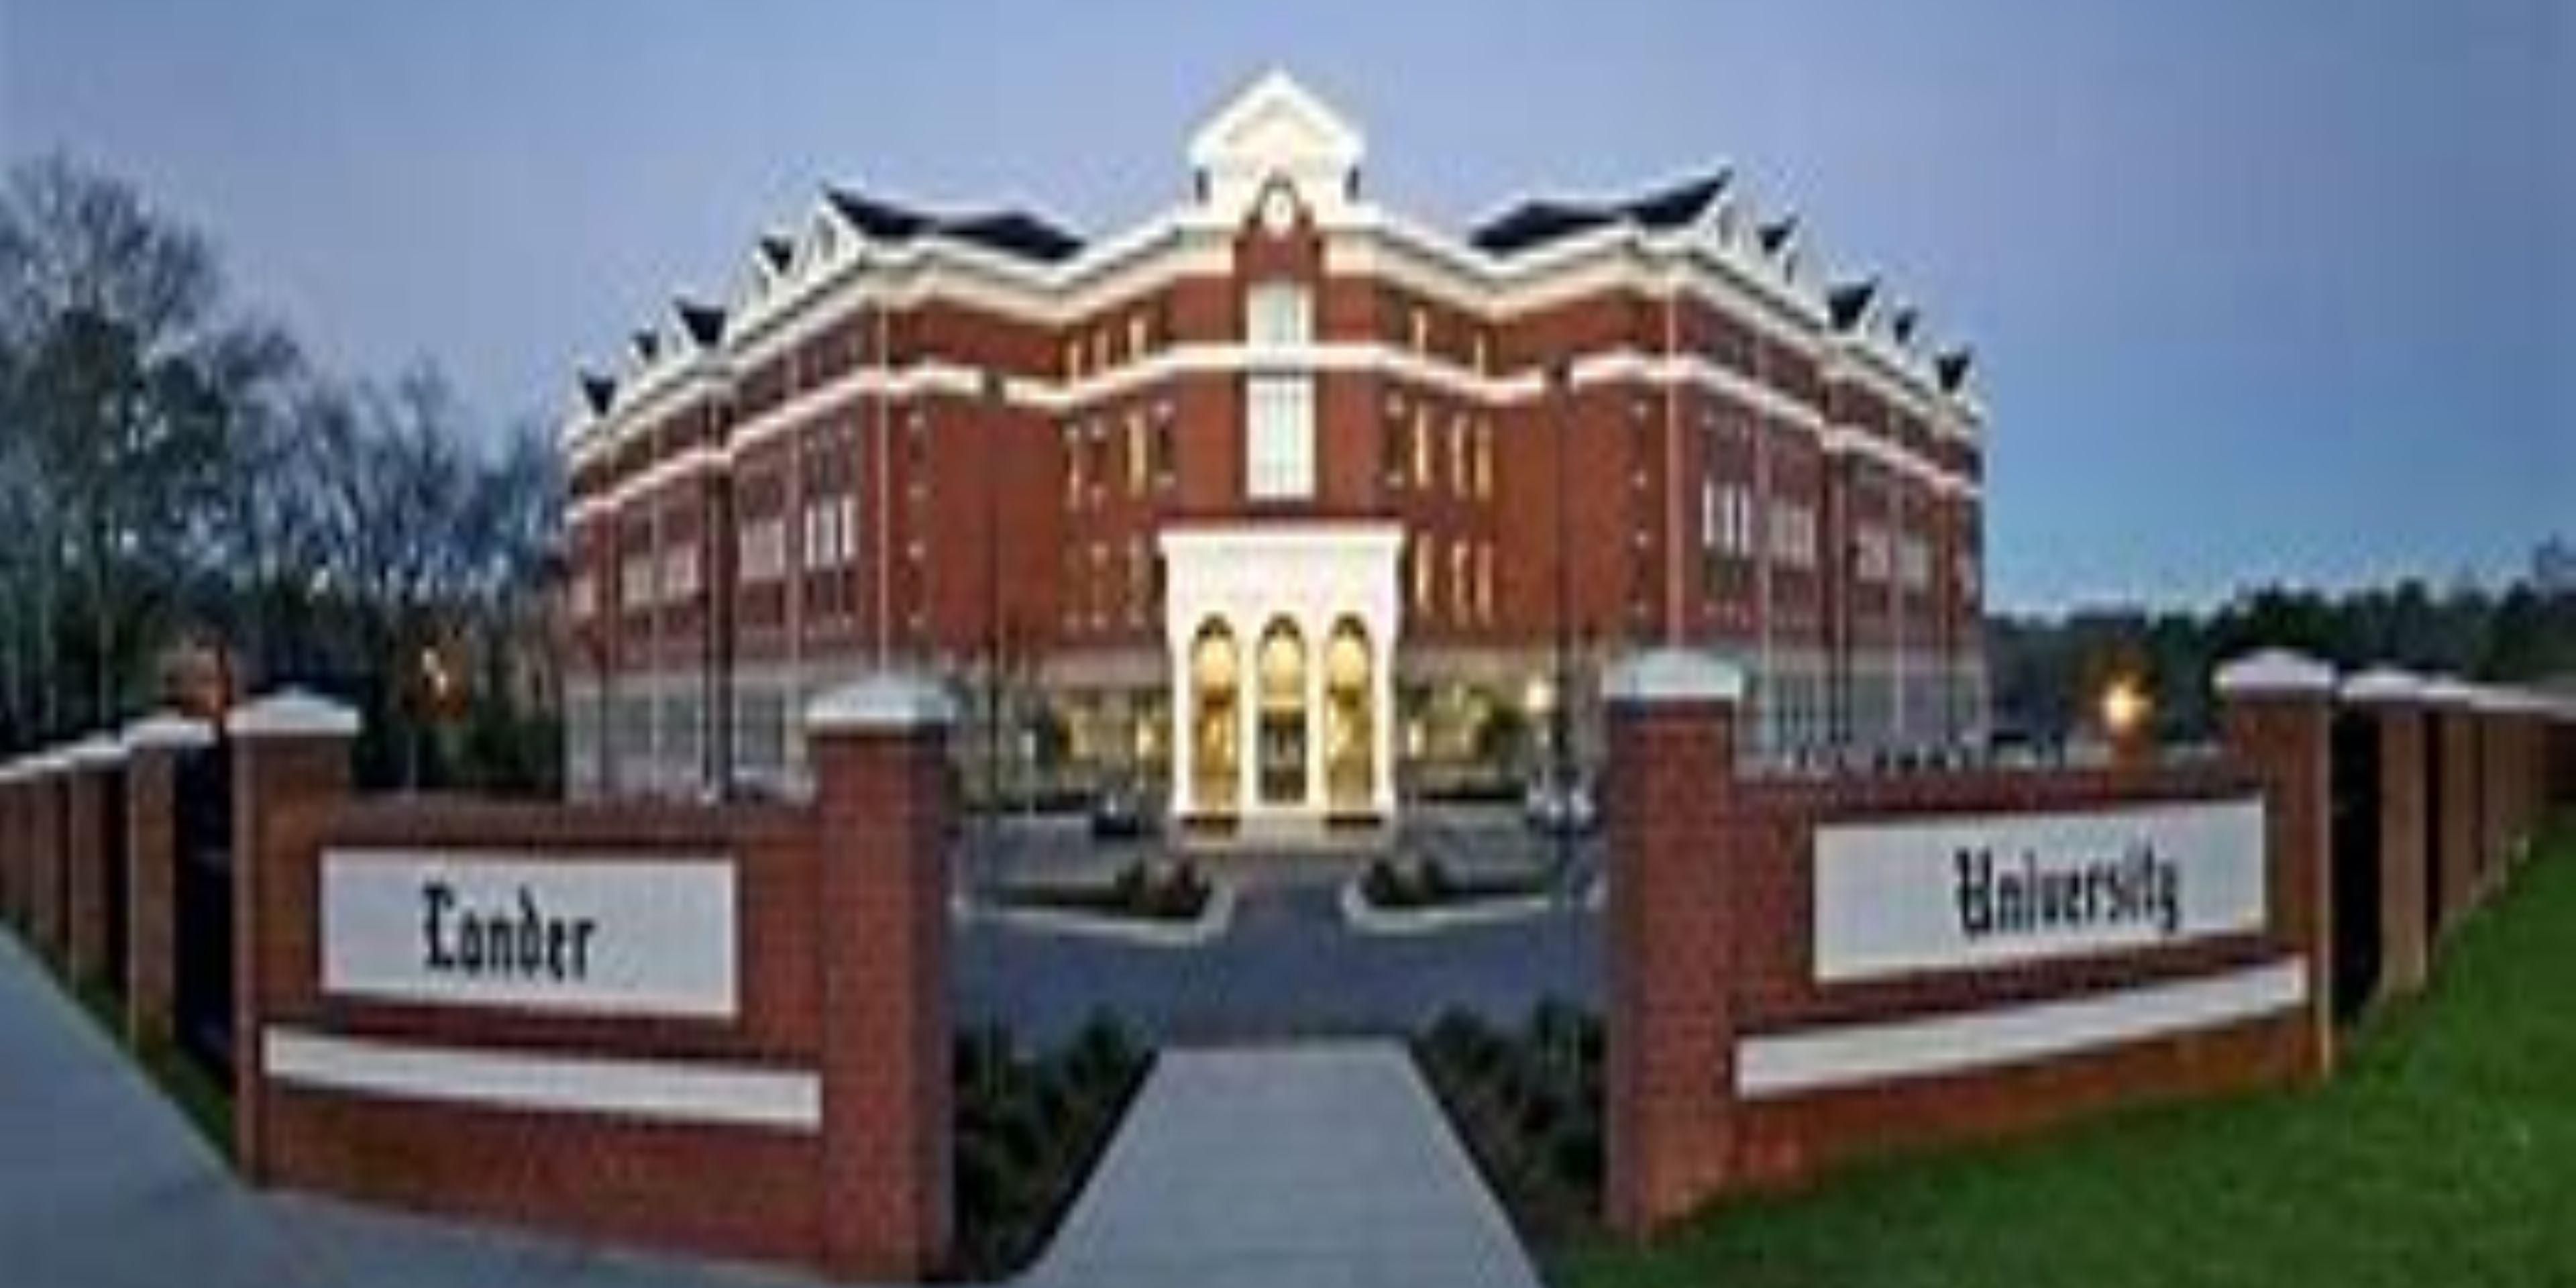 Come stay at our beautiful hotel while you are visiting Lander University. We are just a short drive from the campus. Stay for parents weekend, graduation, or just a short visit to check on your student.